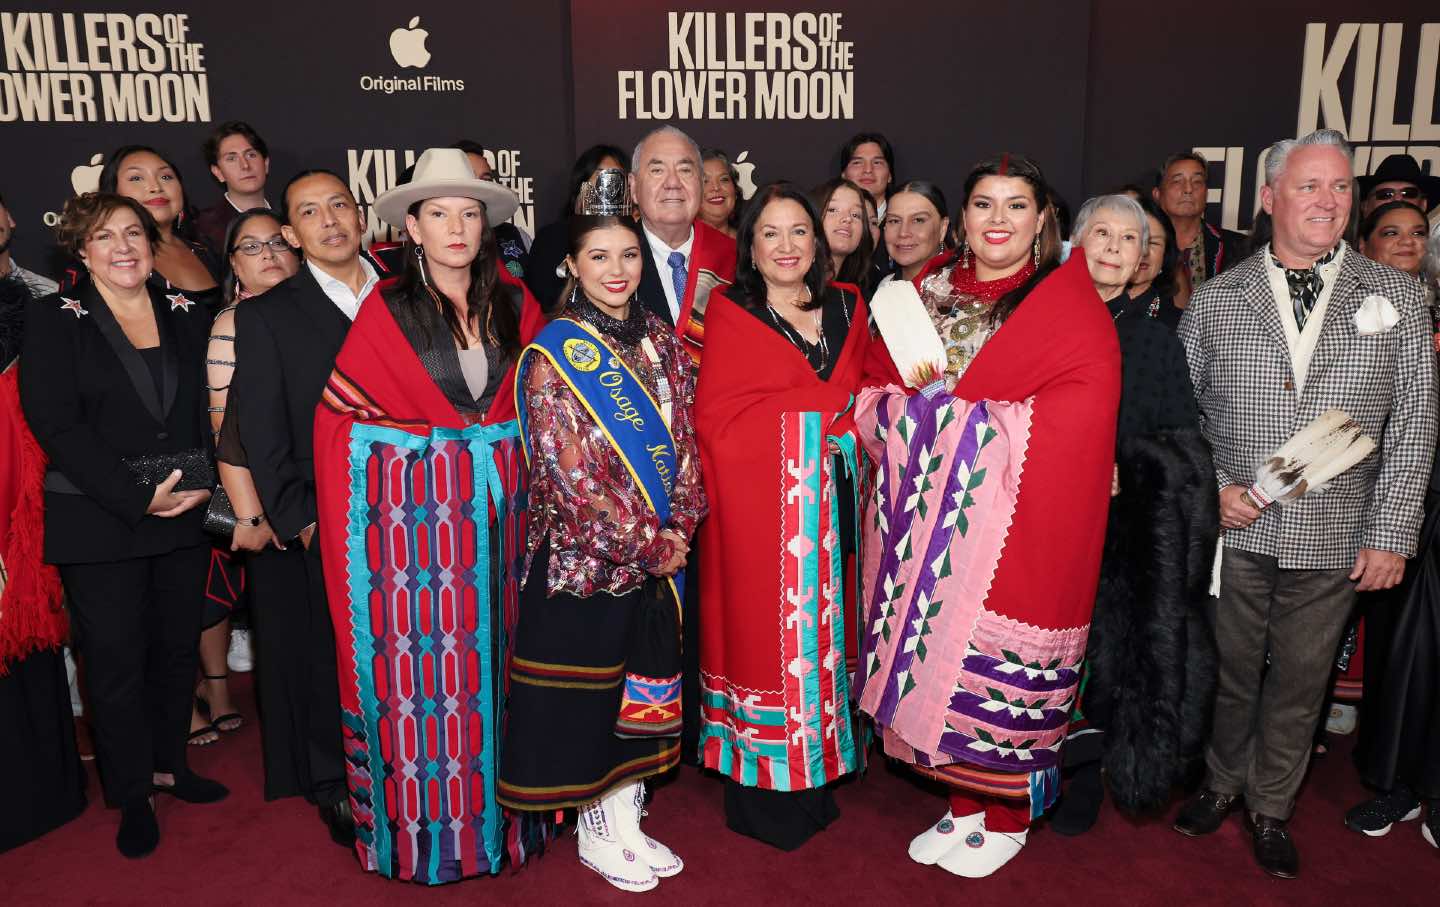 Osage folks on the red carpet NY premiere of Scorsese's Killers of the Flower Moon